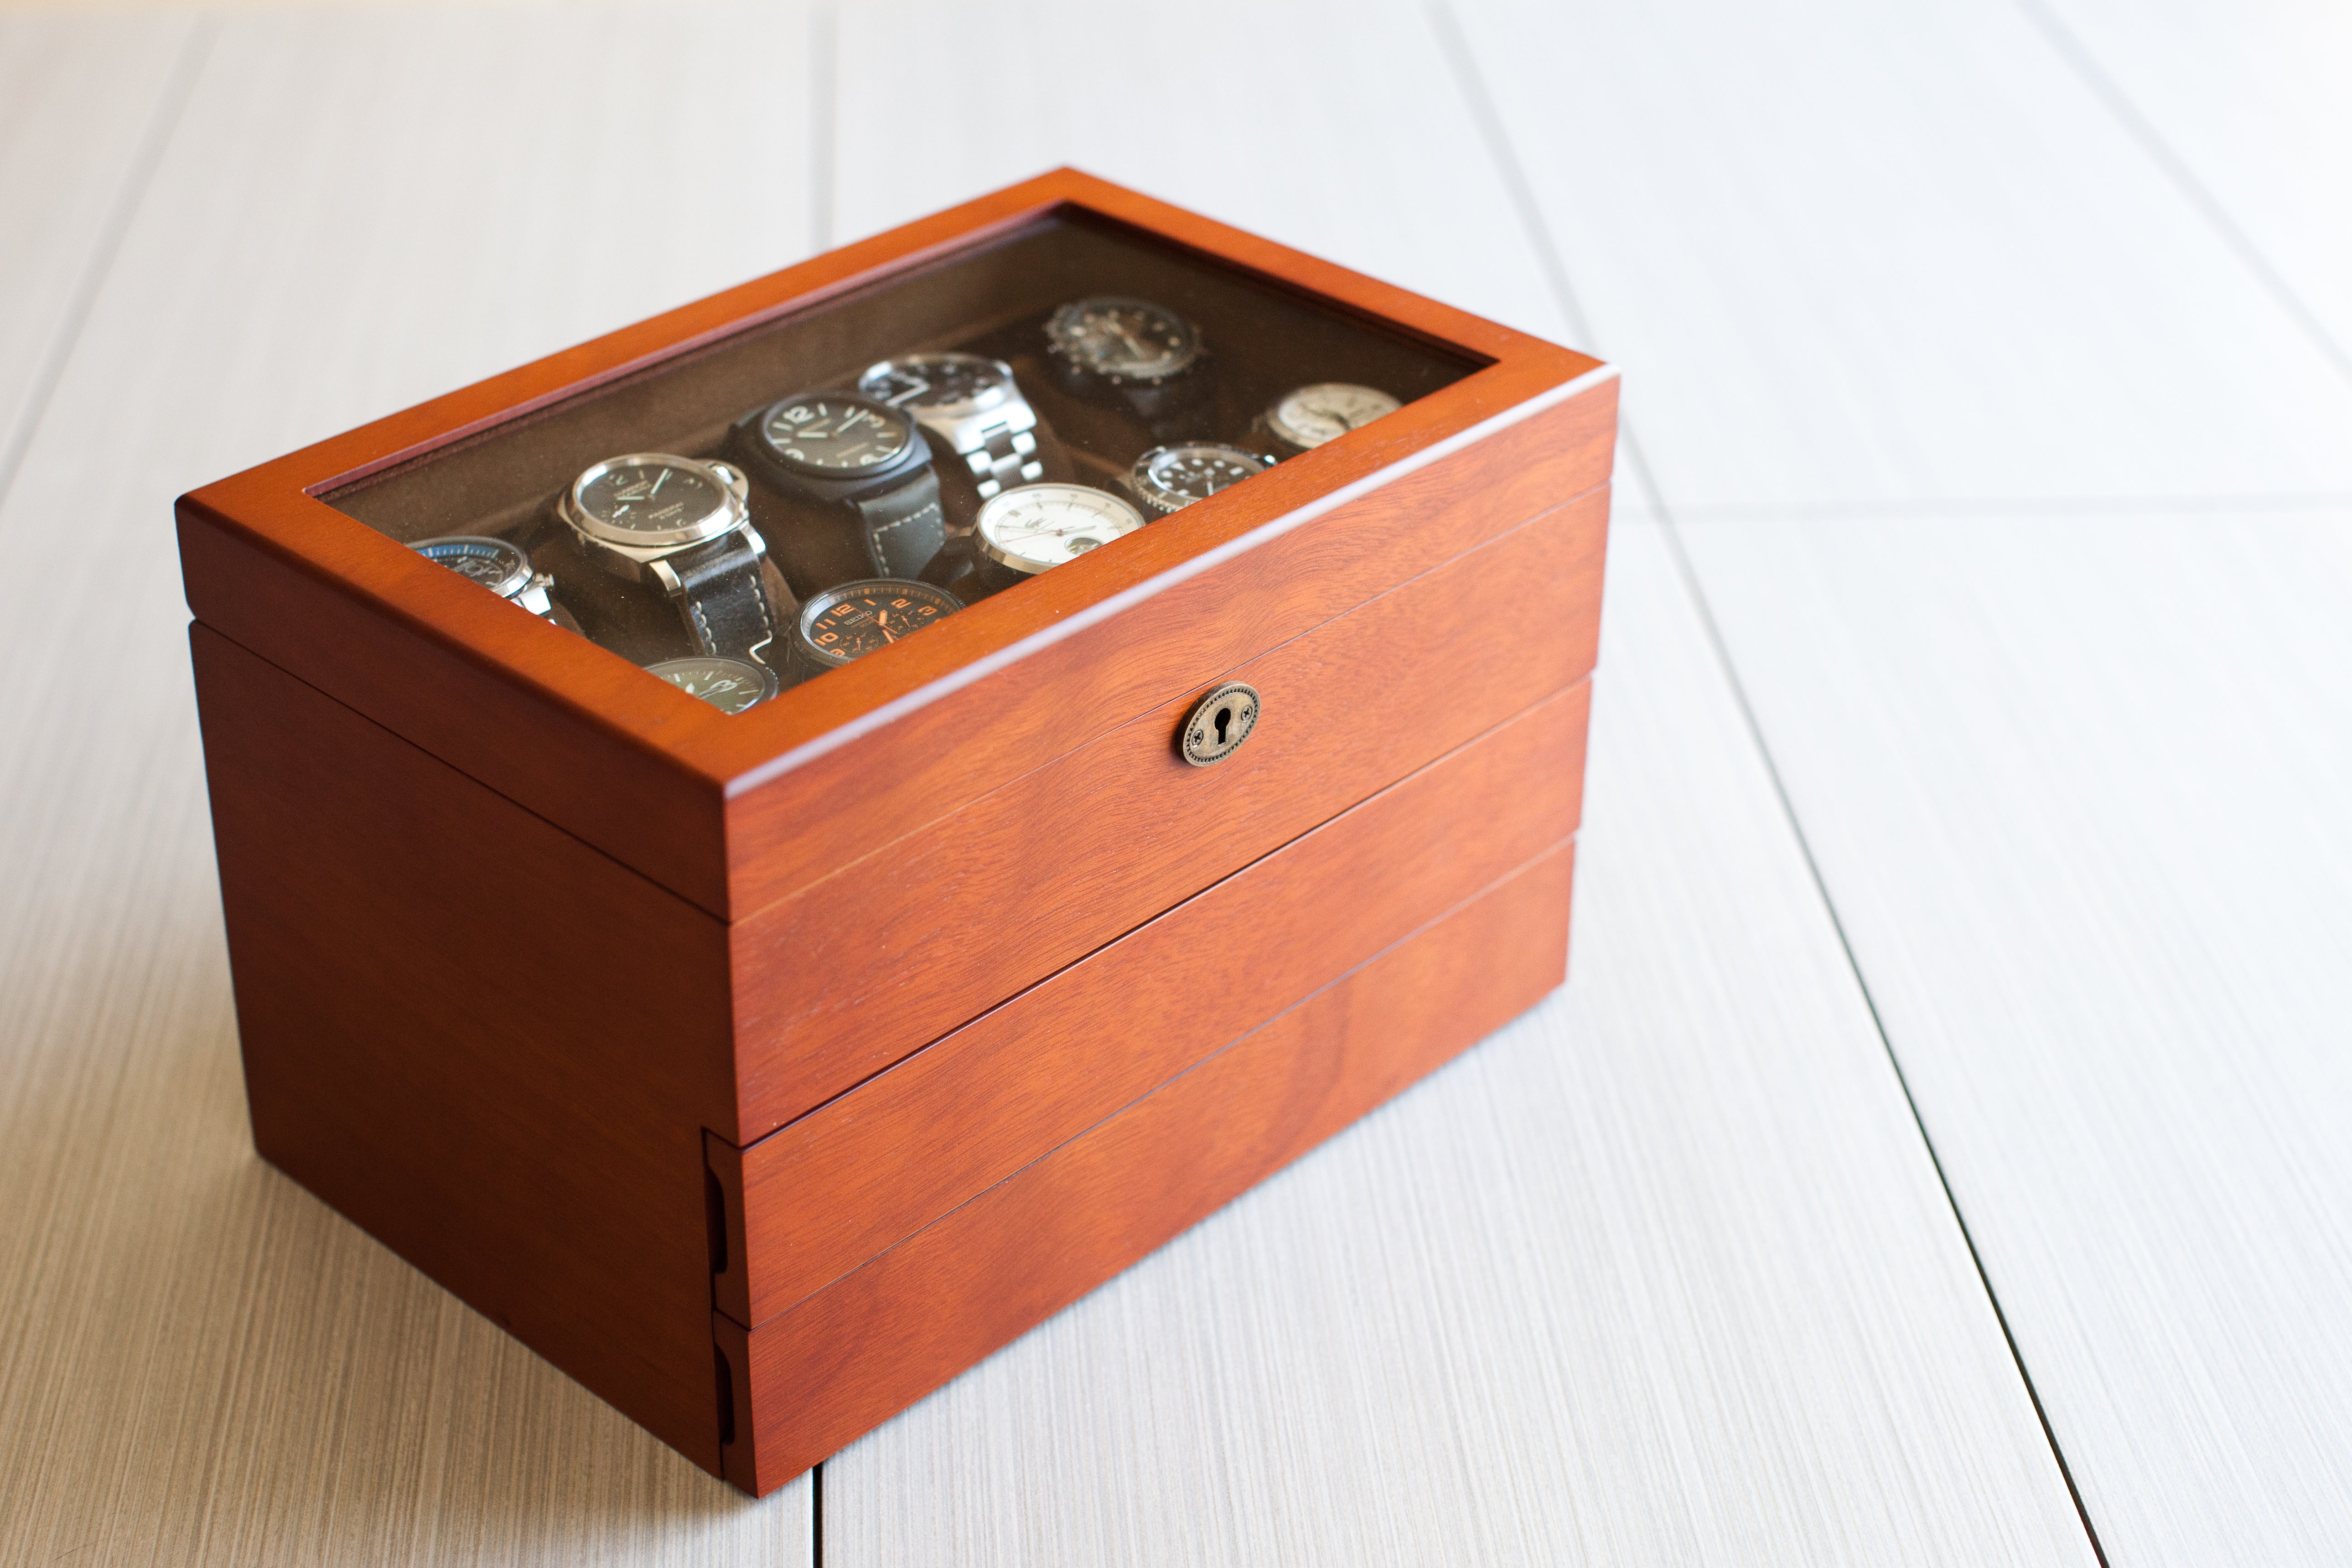 Vintage 10 - Solid Top - Watch Box - Caddy Bay Collection